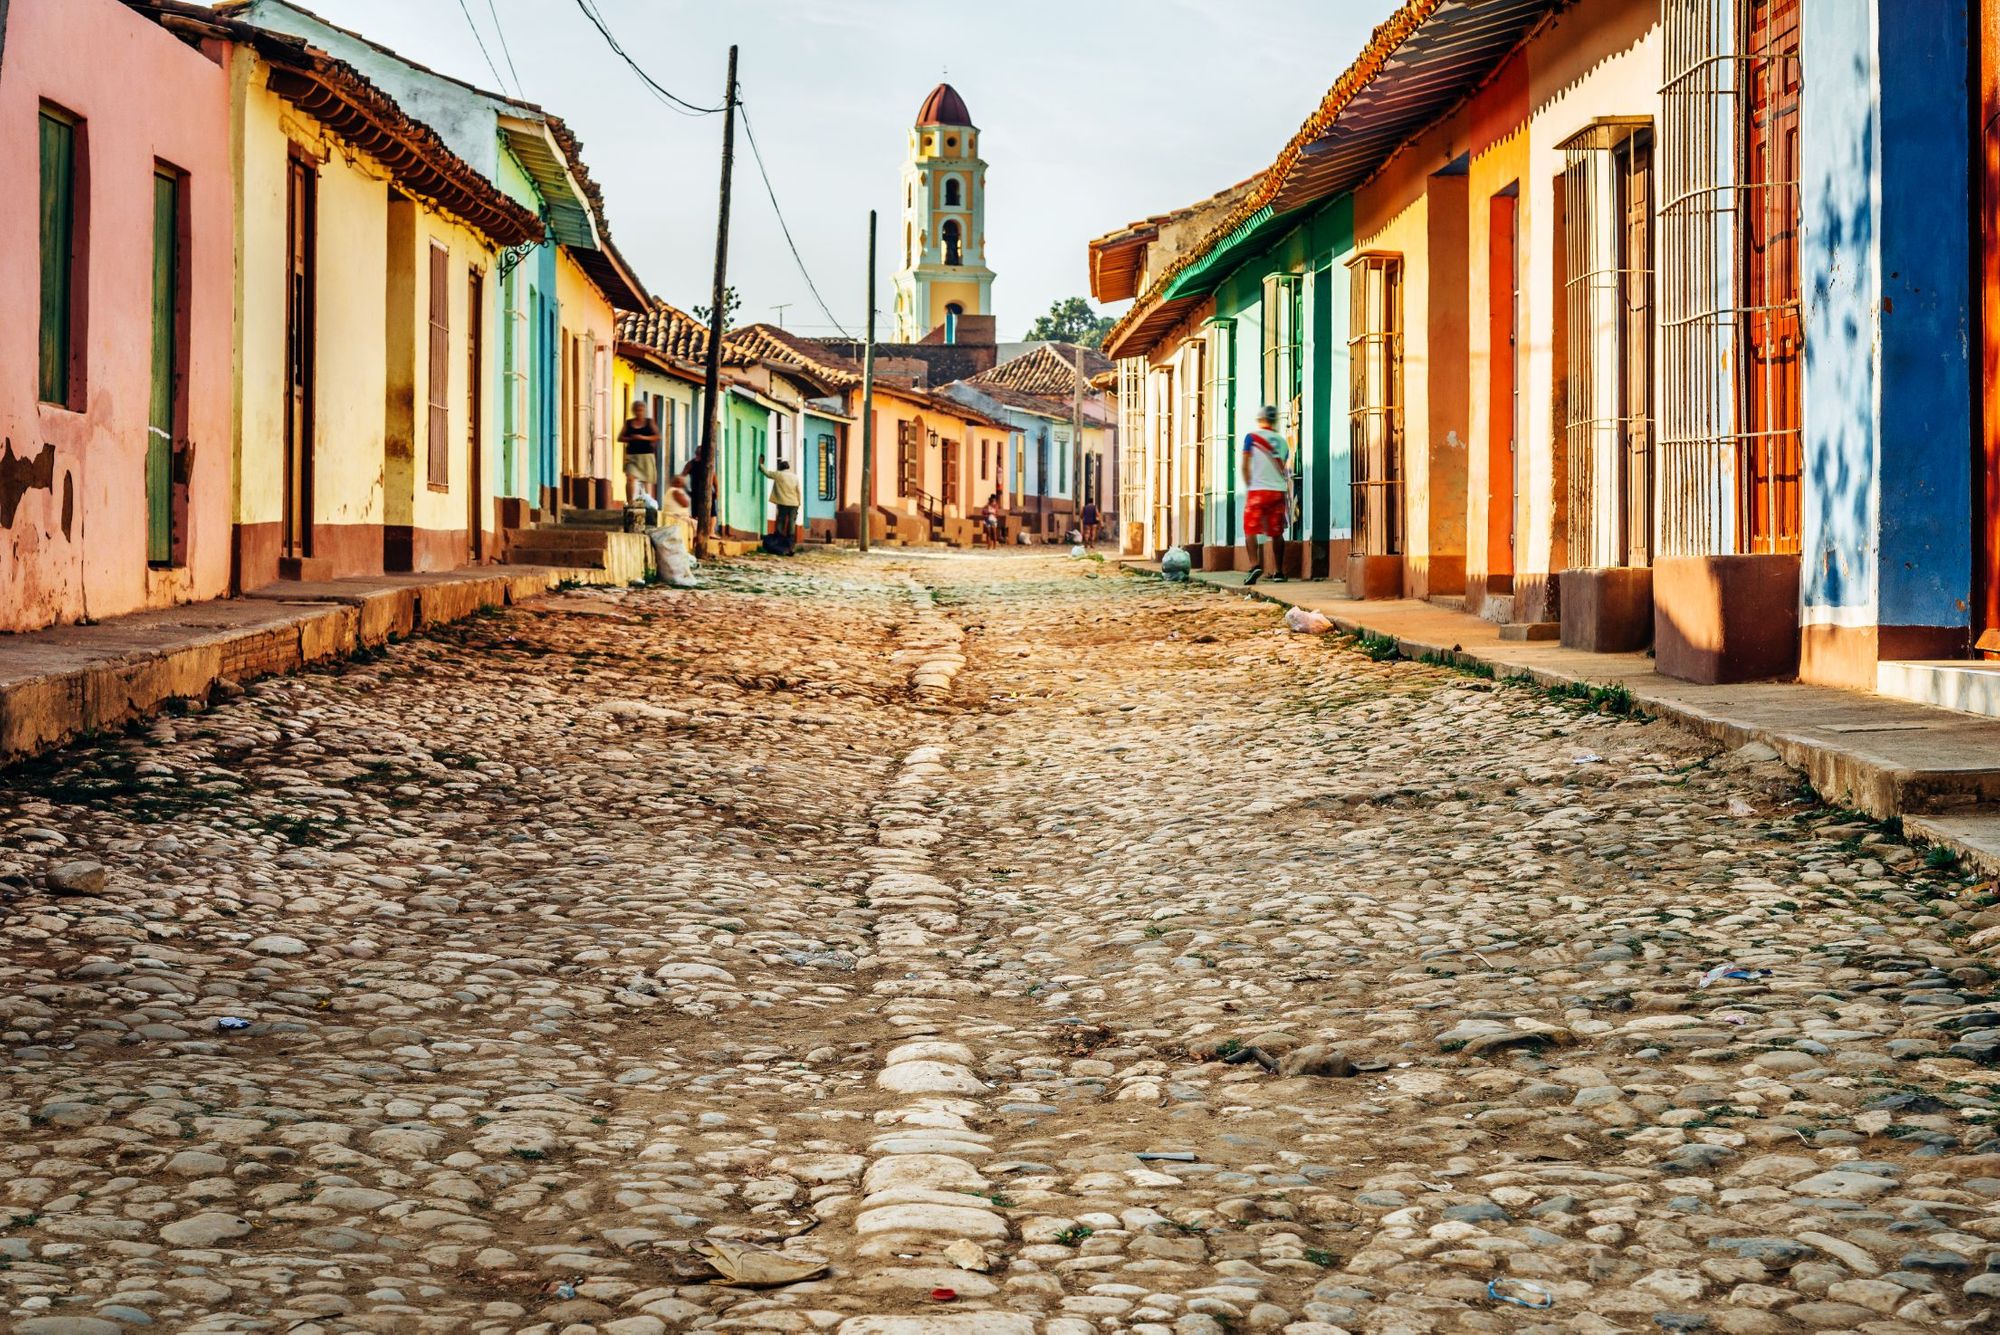 The town of Trinidad, a living museum in central Cuba, which is home to a plethora of casas particulares. Photo: Getty